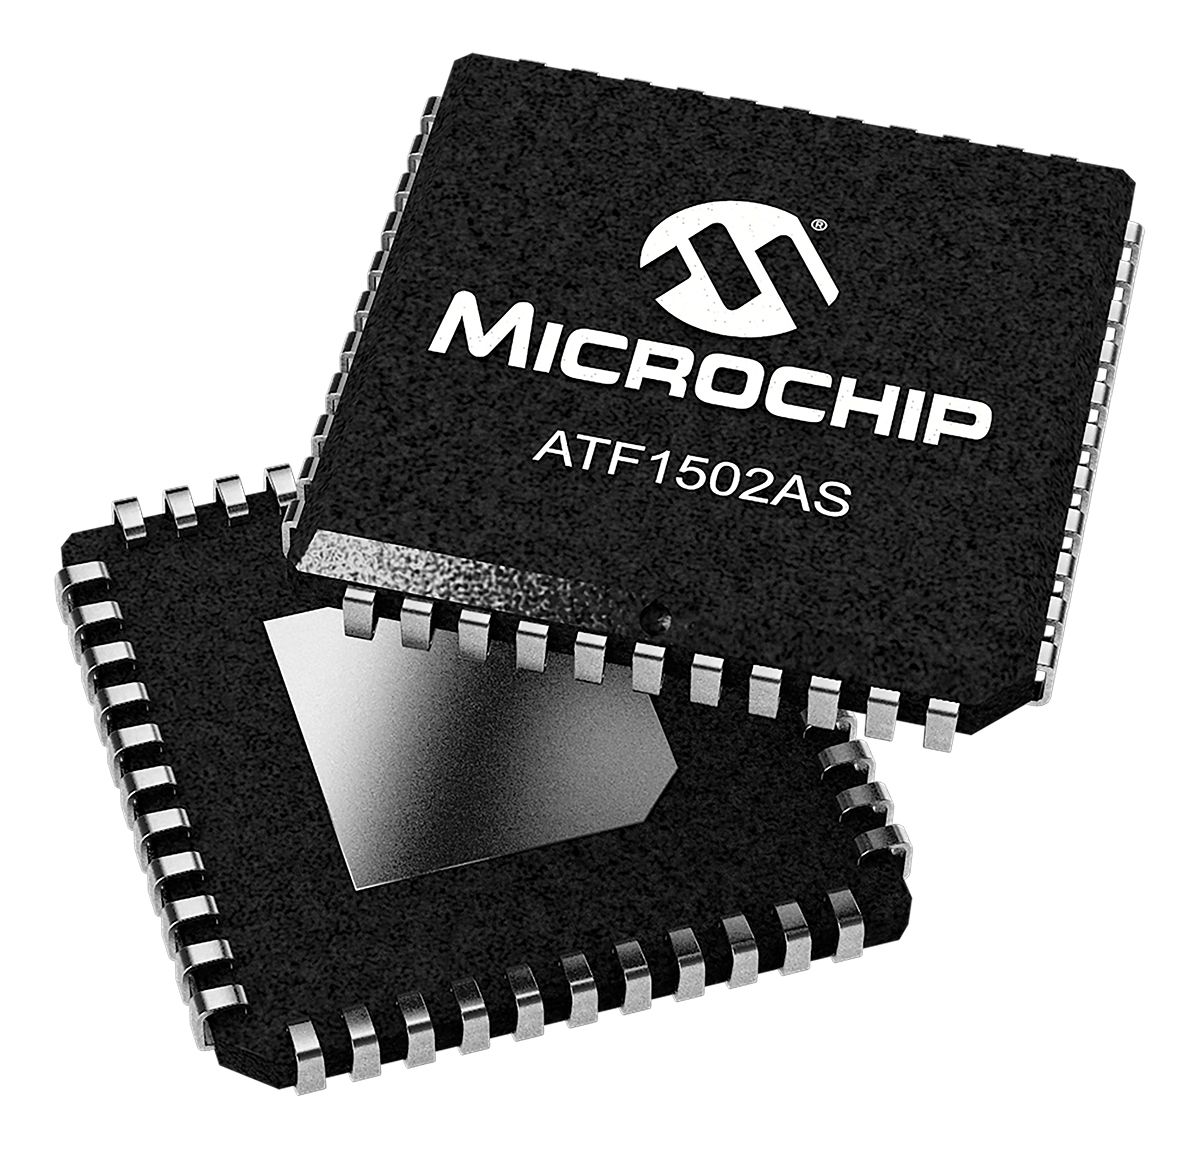 Microchip ATF1502ASL-25AU44, CPLD ATF1502AS EEPROM 32 Cells, 32 I/O, 2 Labs, 25ns, ISP, 44-Pin TQFP